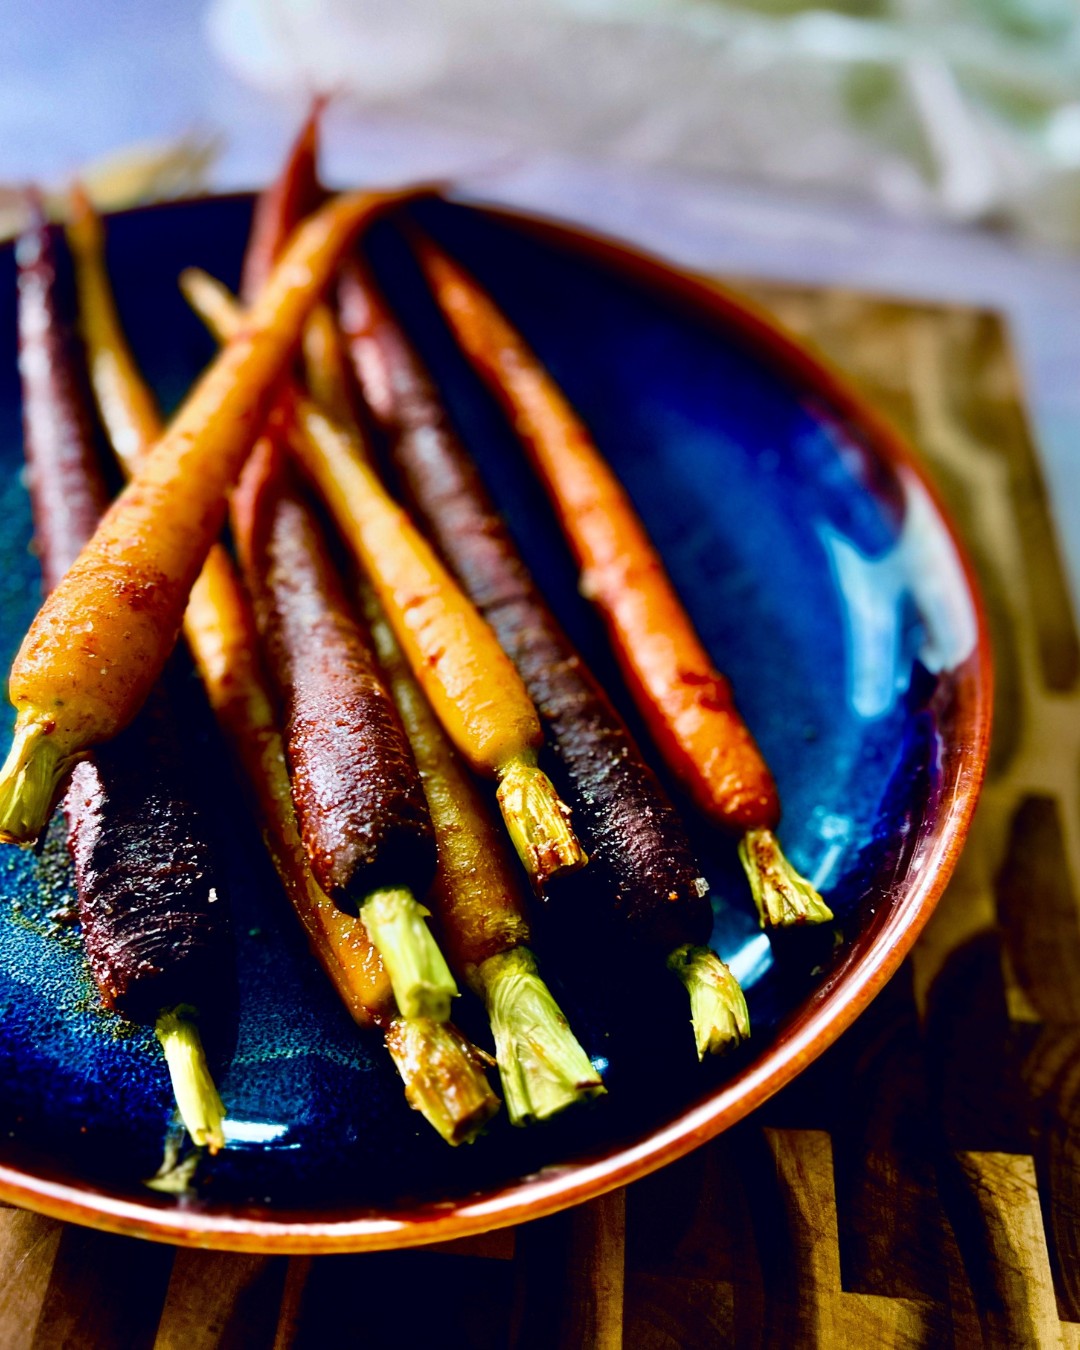 This roasted carrots recipe checks all the boxes: crowd-pleasing, easy to cook, reasonably healthy. It also gets double bonus points because they are completely addictive as well. They are also super easy to make with just a touch of smoky salt. I'm sure you'll love them as much as I do.